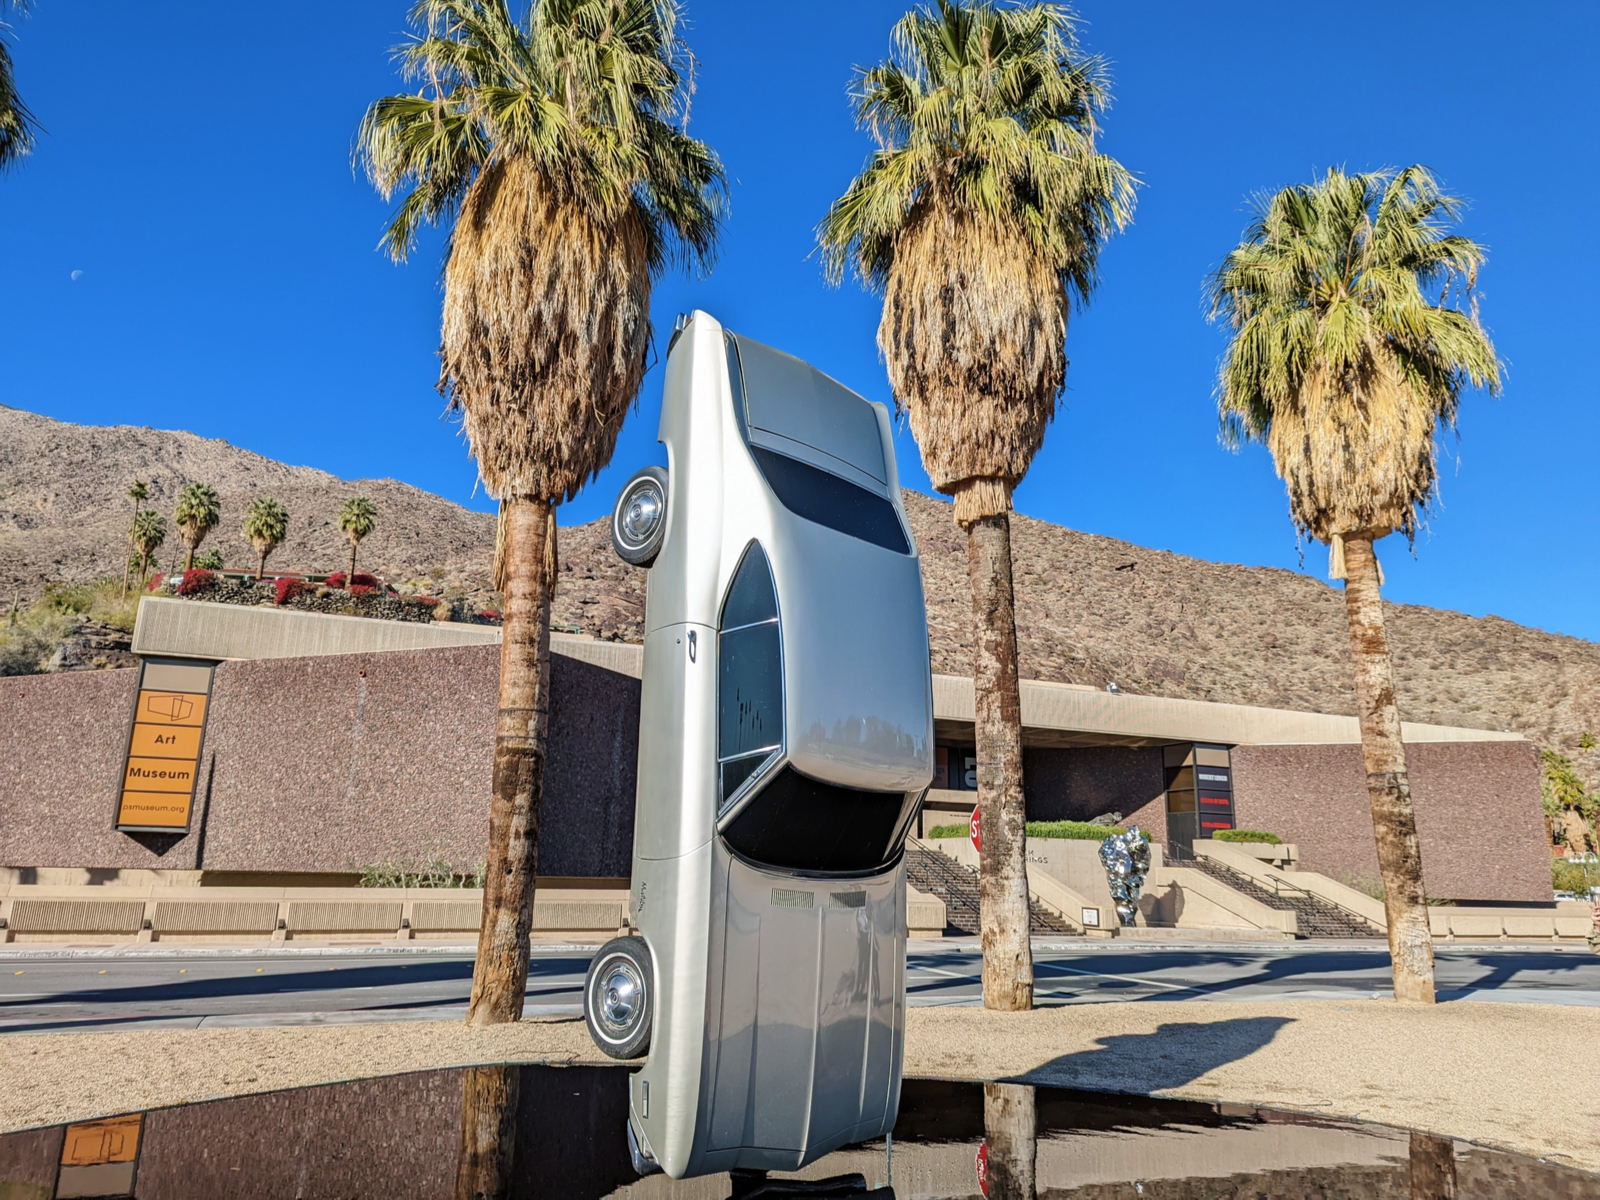 Cool car sculpture outside one of the best hotels in Palm Springs